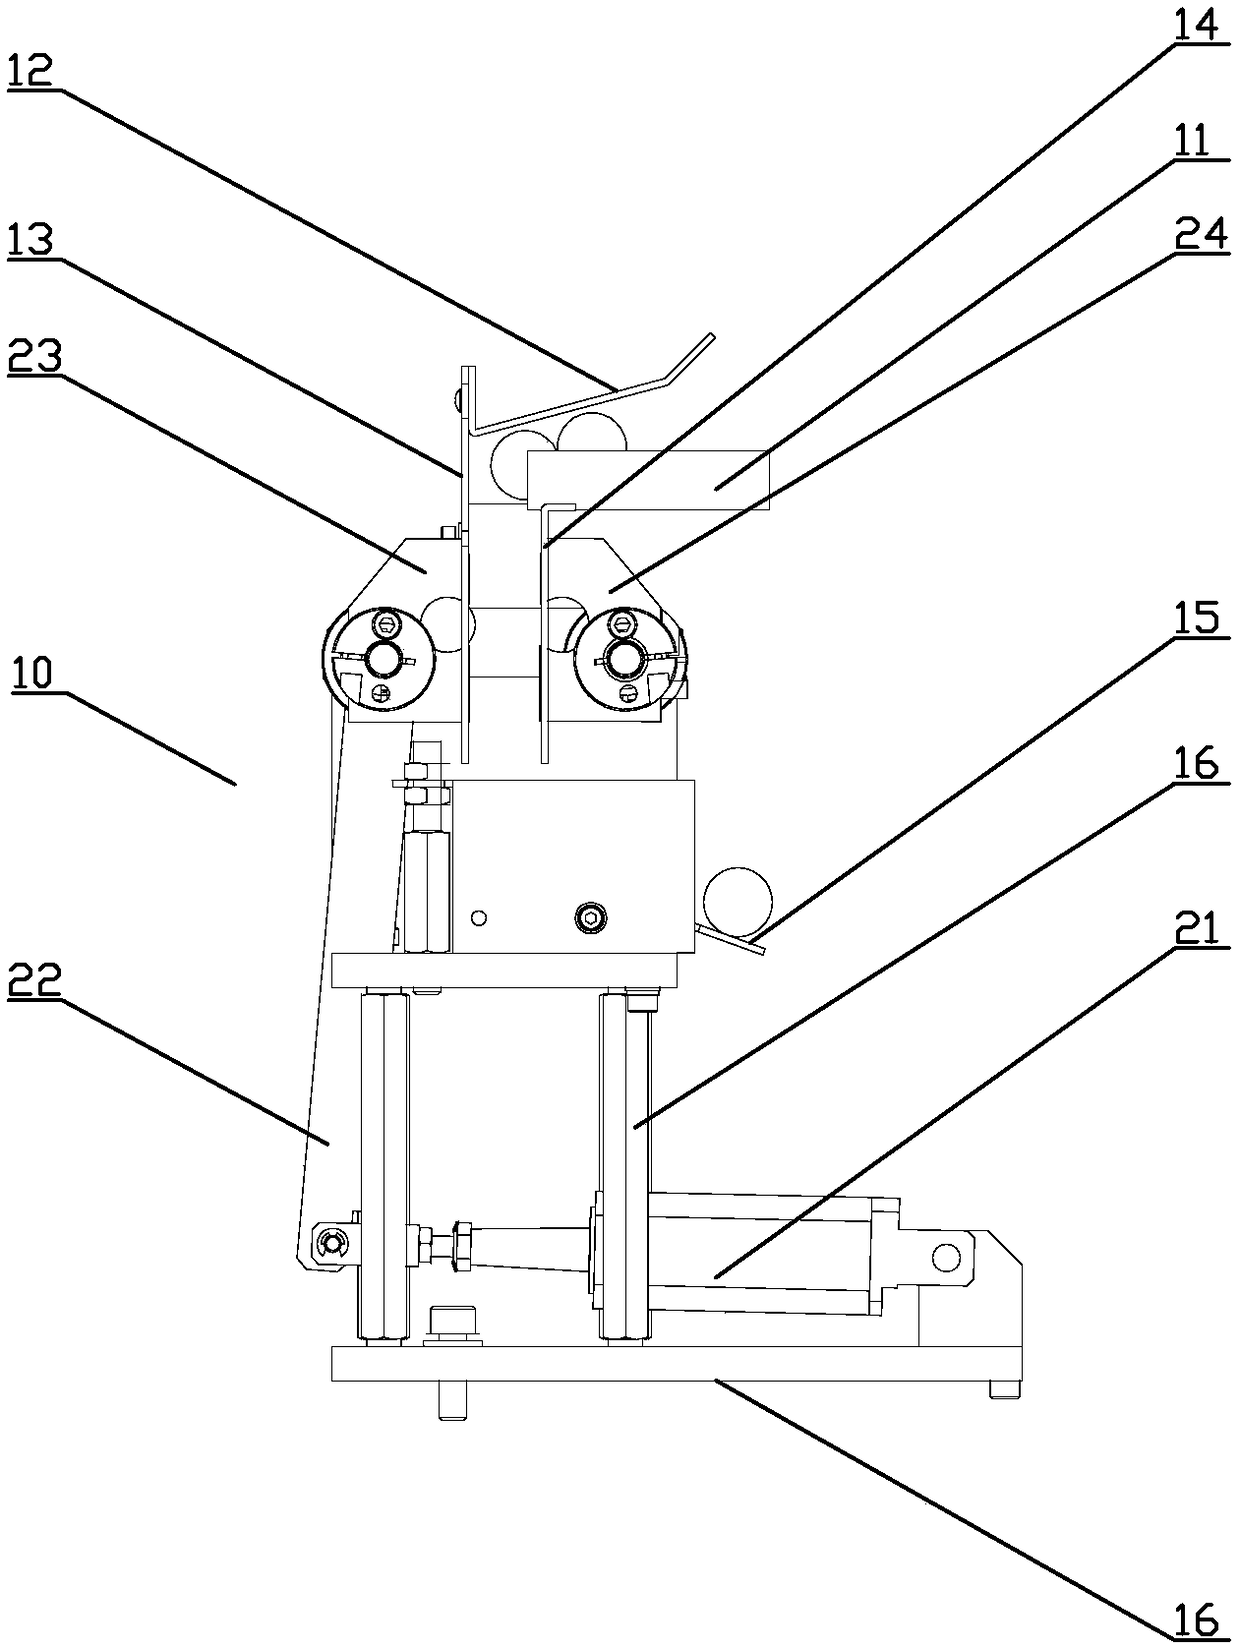 Intermittent rod part collection device